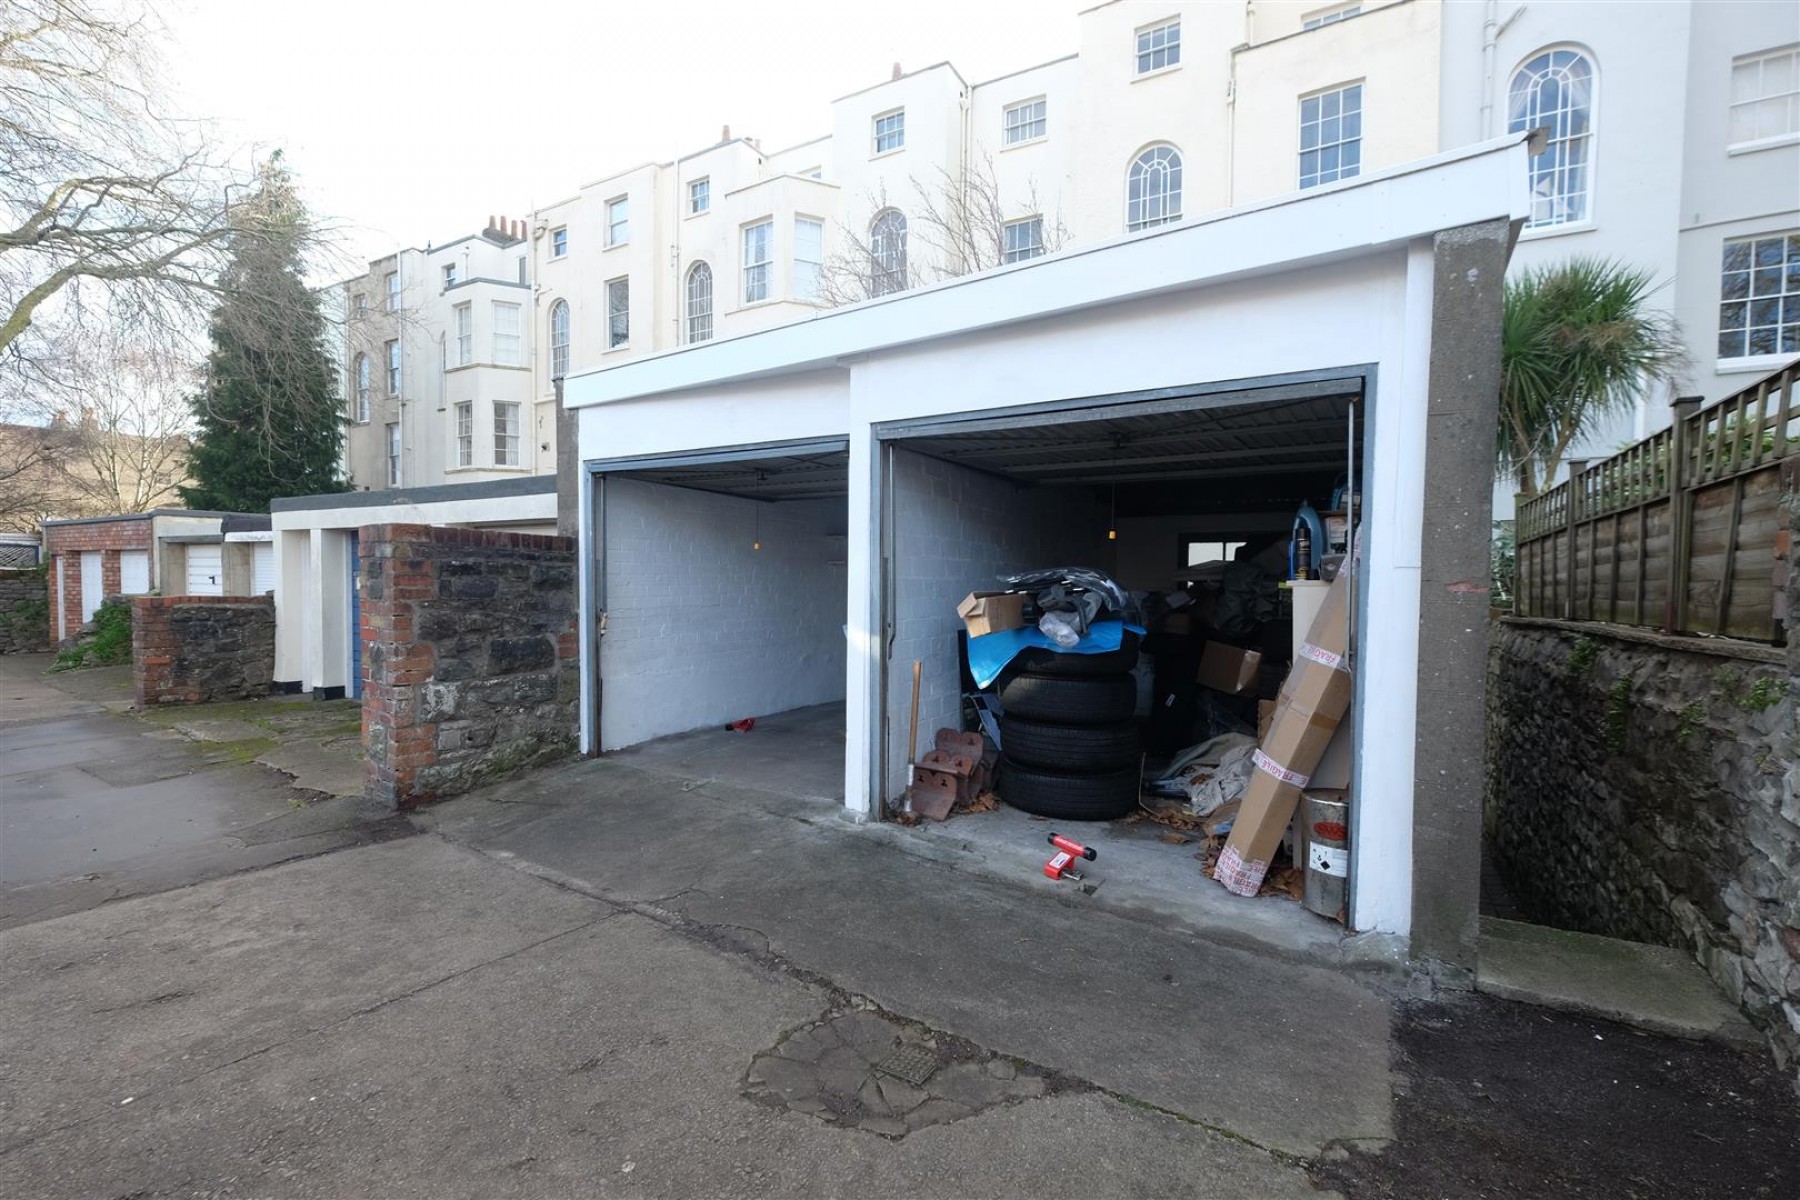 Images for DOUBLE GARAGE - WHITELADIES ROAD